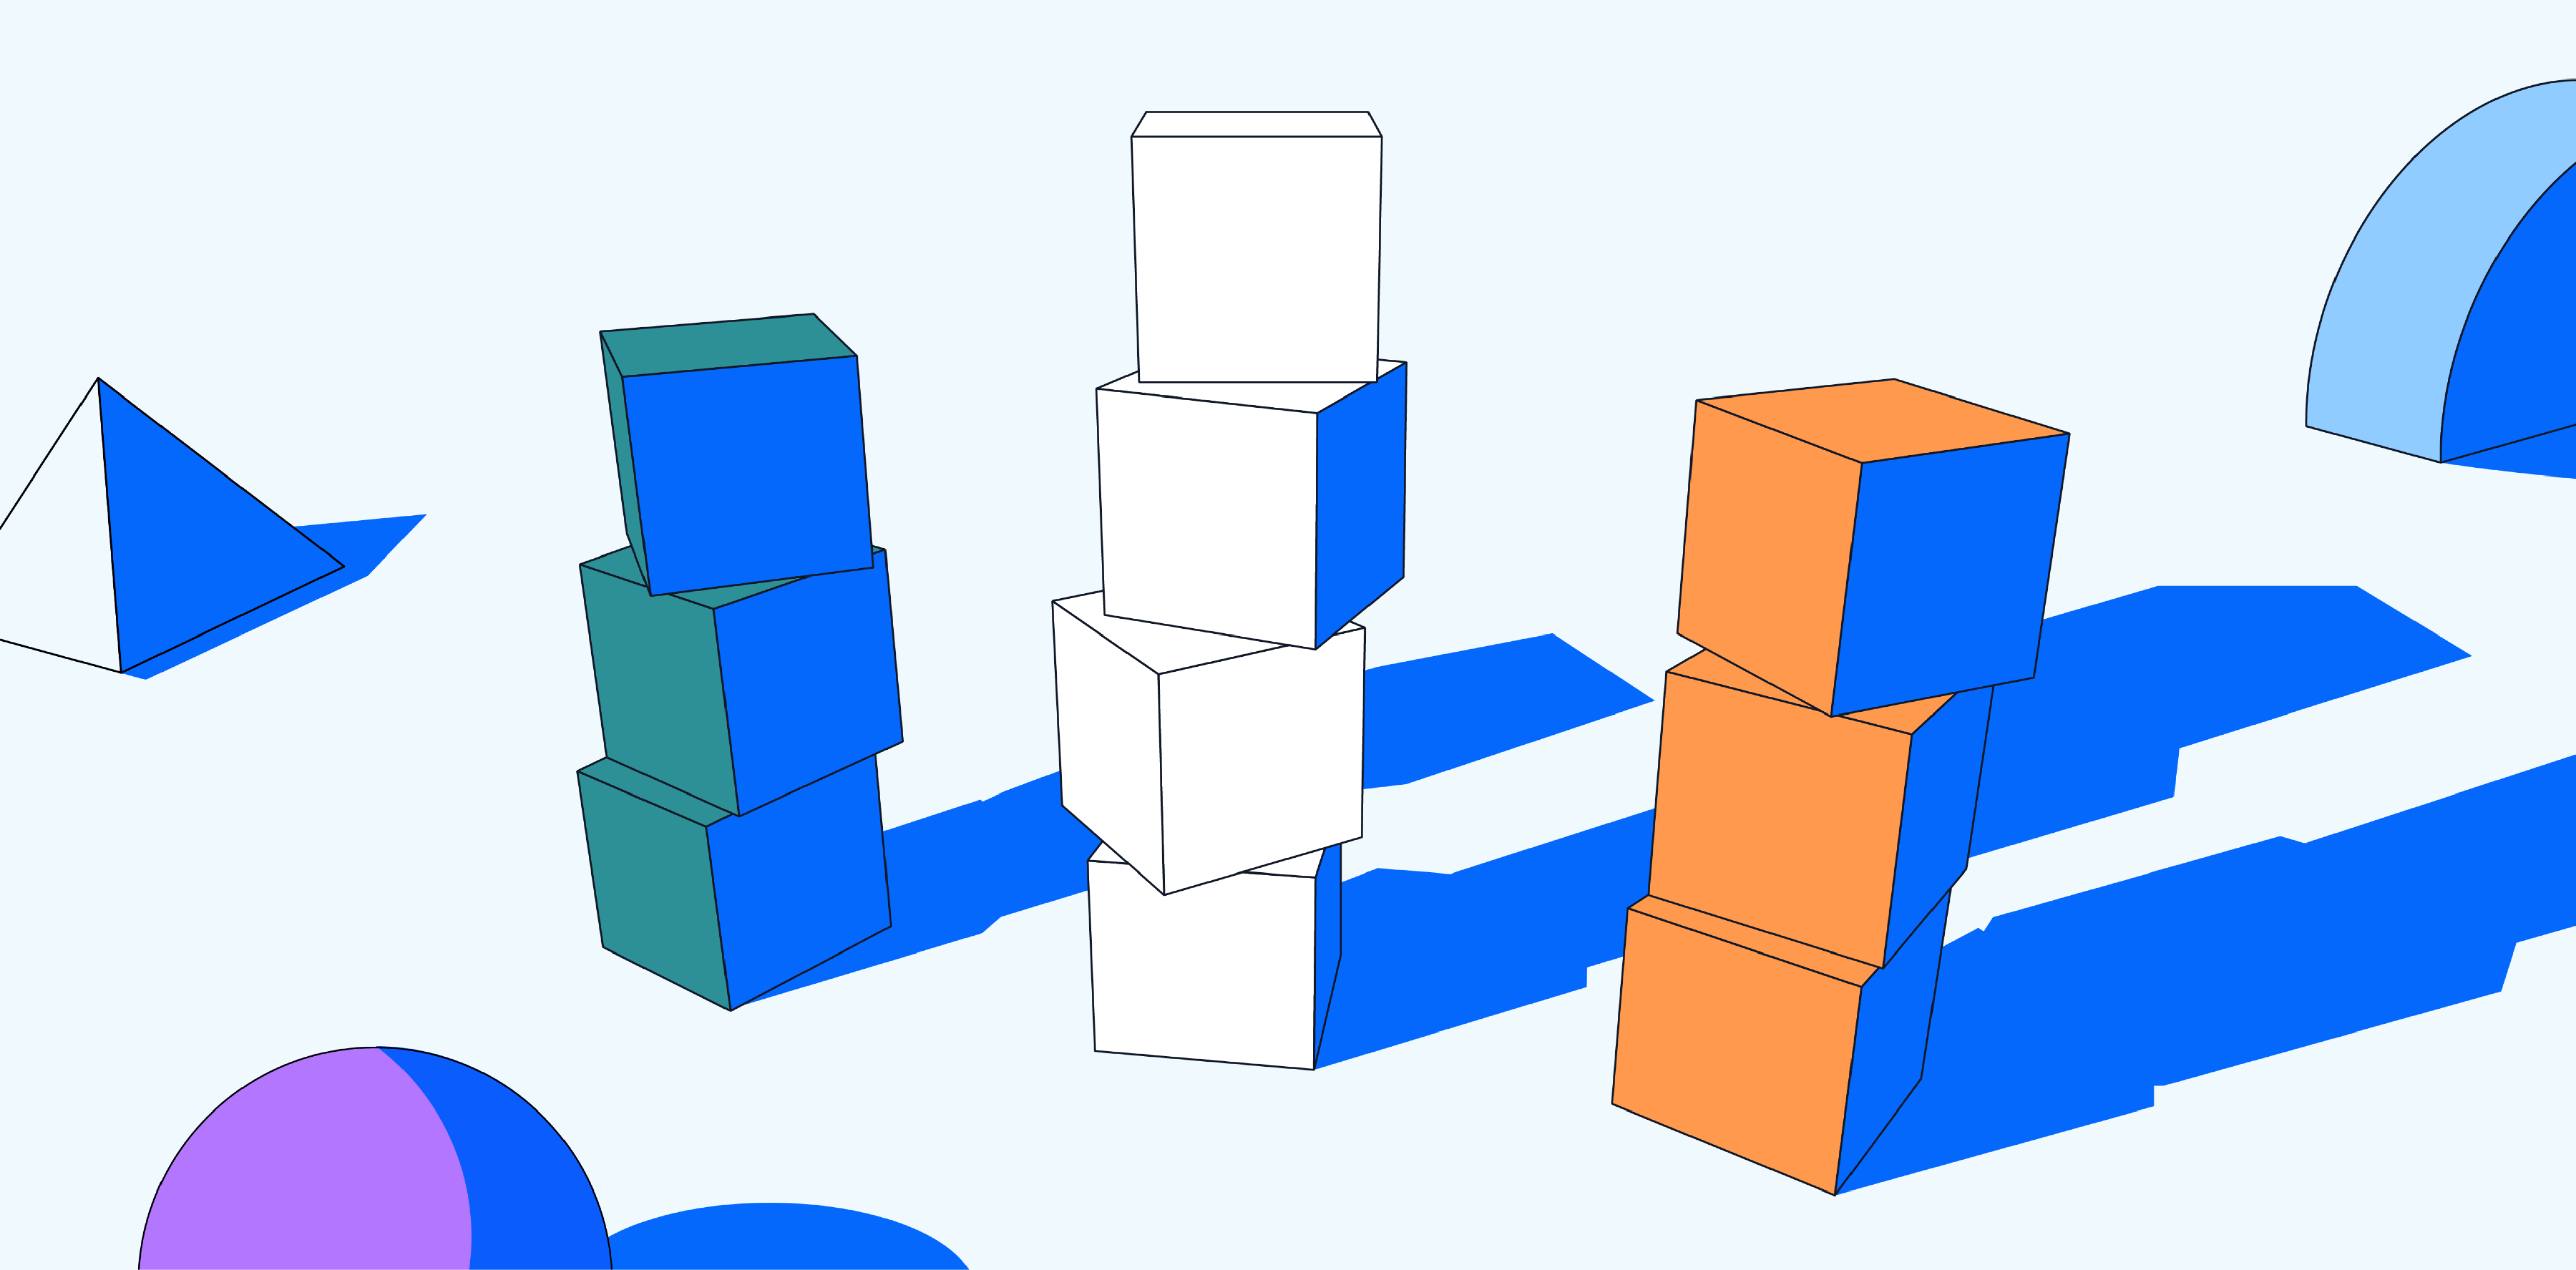 Illustration showing three towers made of stacked cube blocks